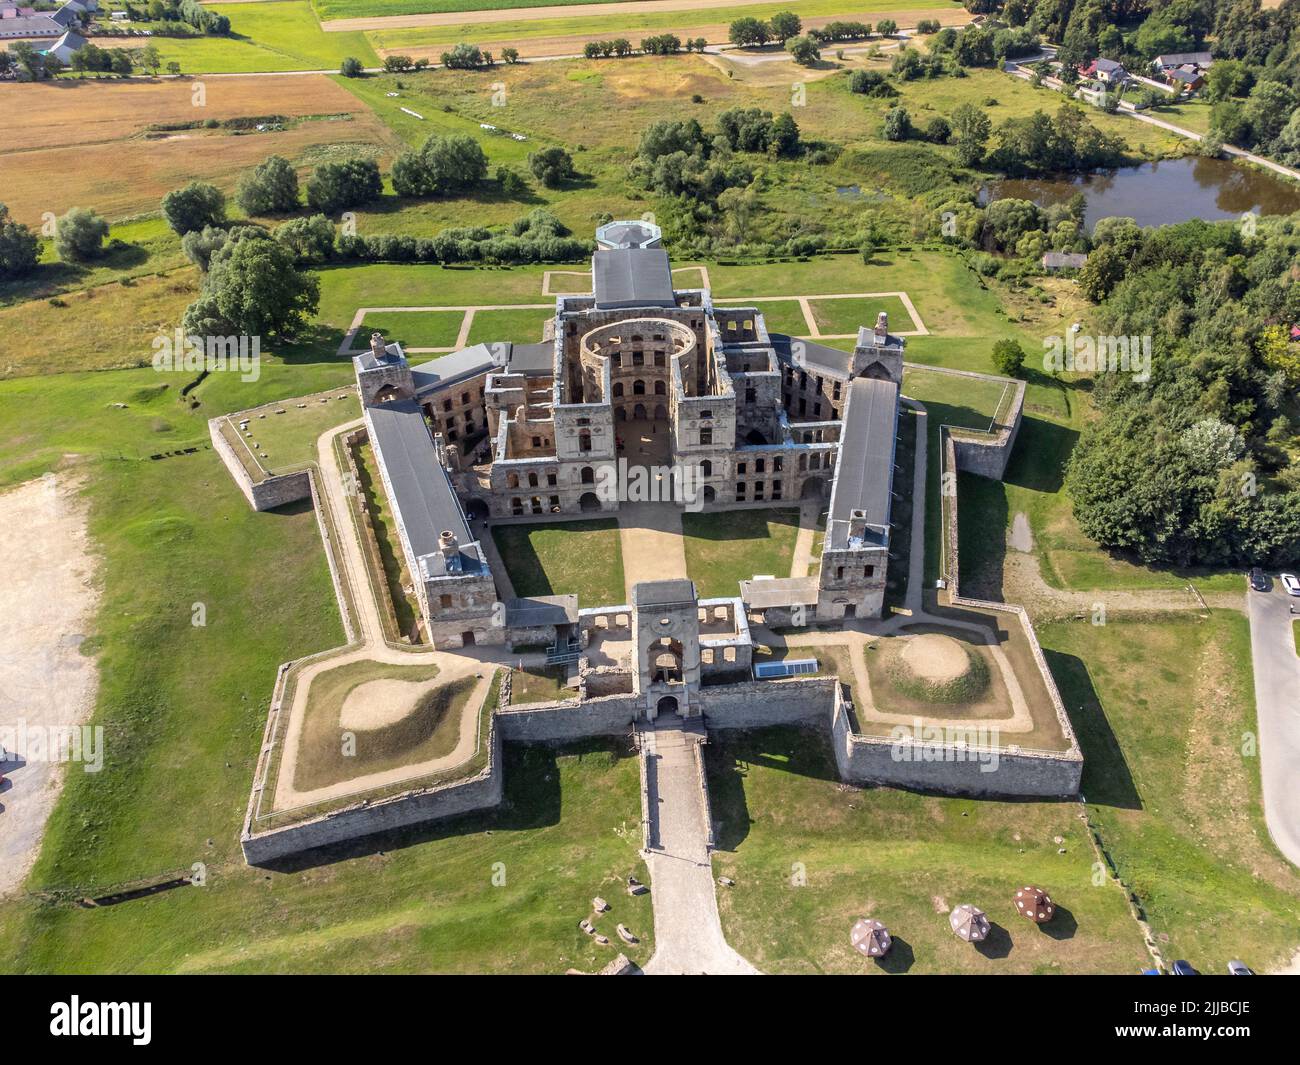 Krzyztopor Castle in Ujazd is a ruin full of magic and mystery lost among the fields and hills of Opatow Land, Poland Stock Photo